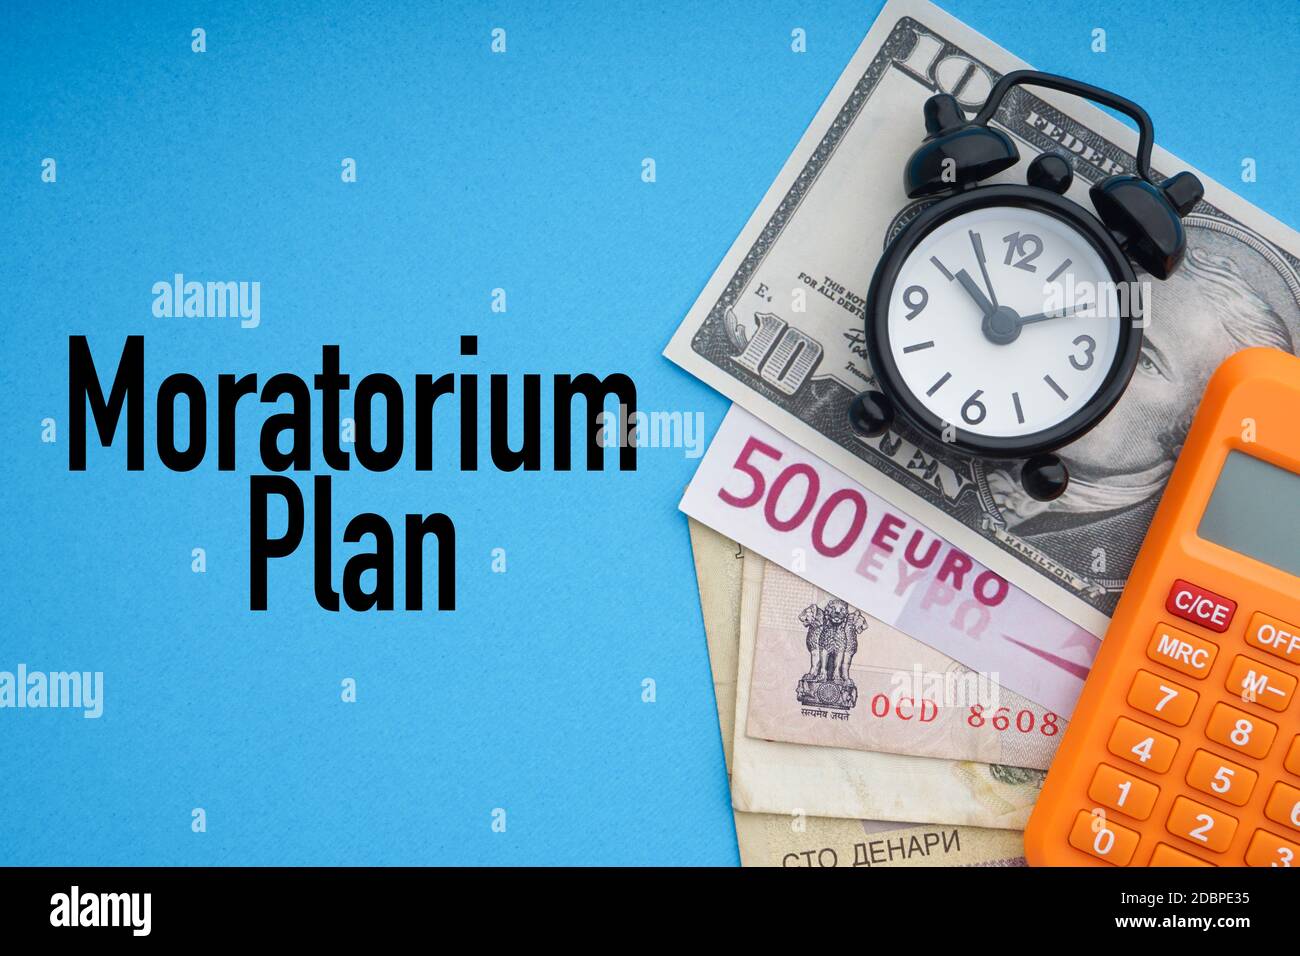 MORATORIUM PLAN text with alarm clock, banknotes currencies and calculator on blue background. Coronavirus Covid19 and Business Concept Stock Photo